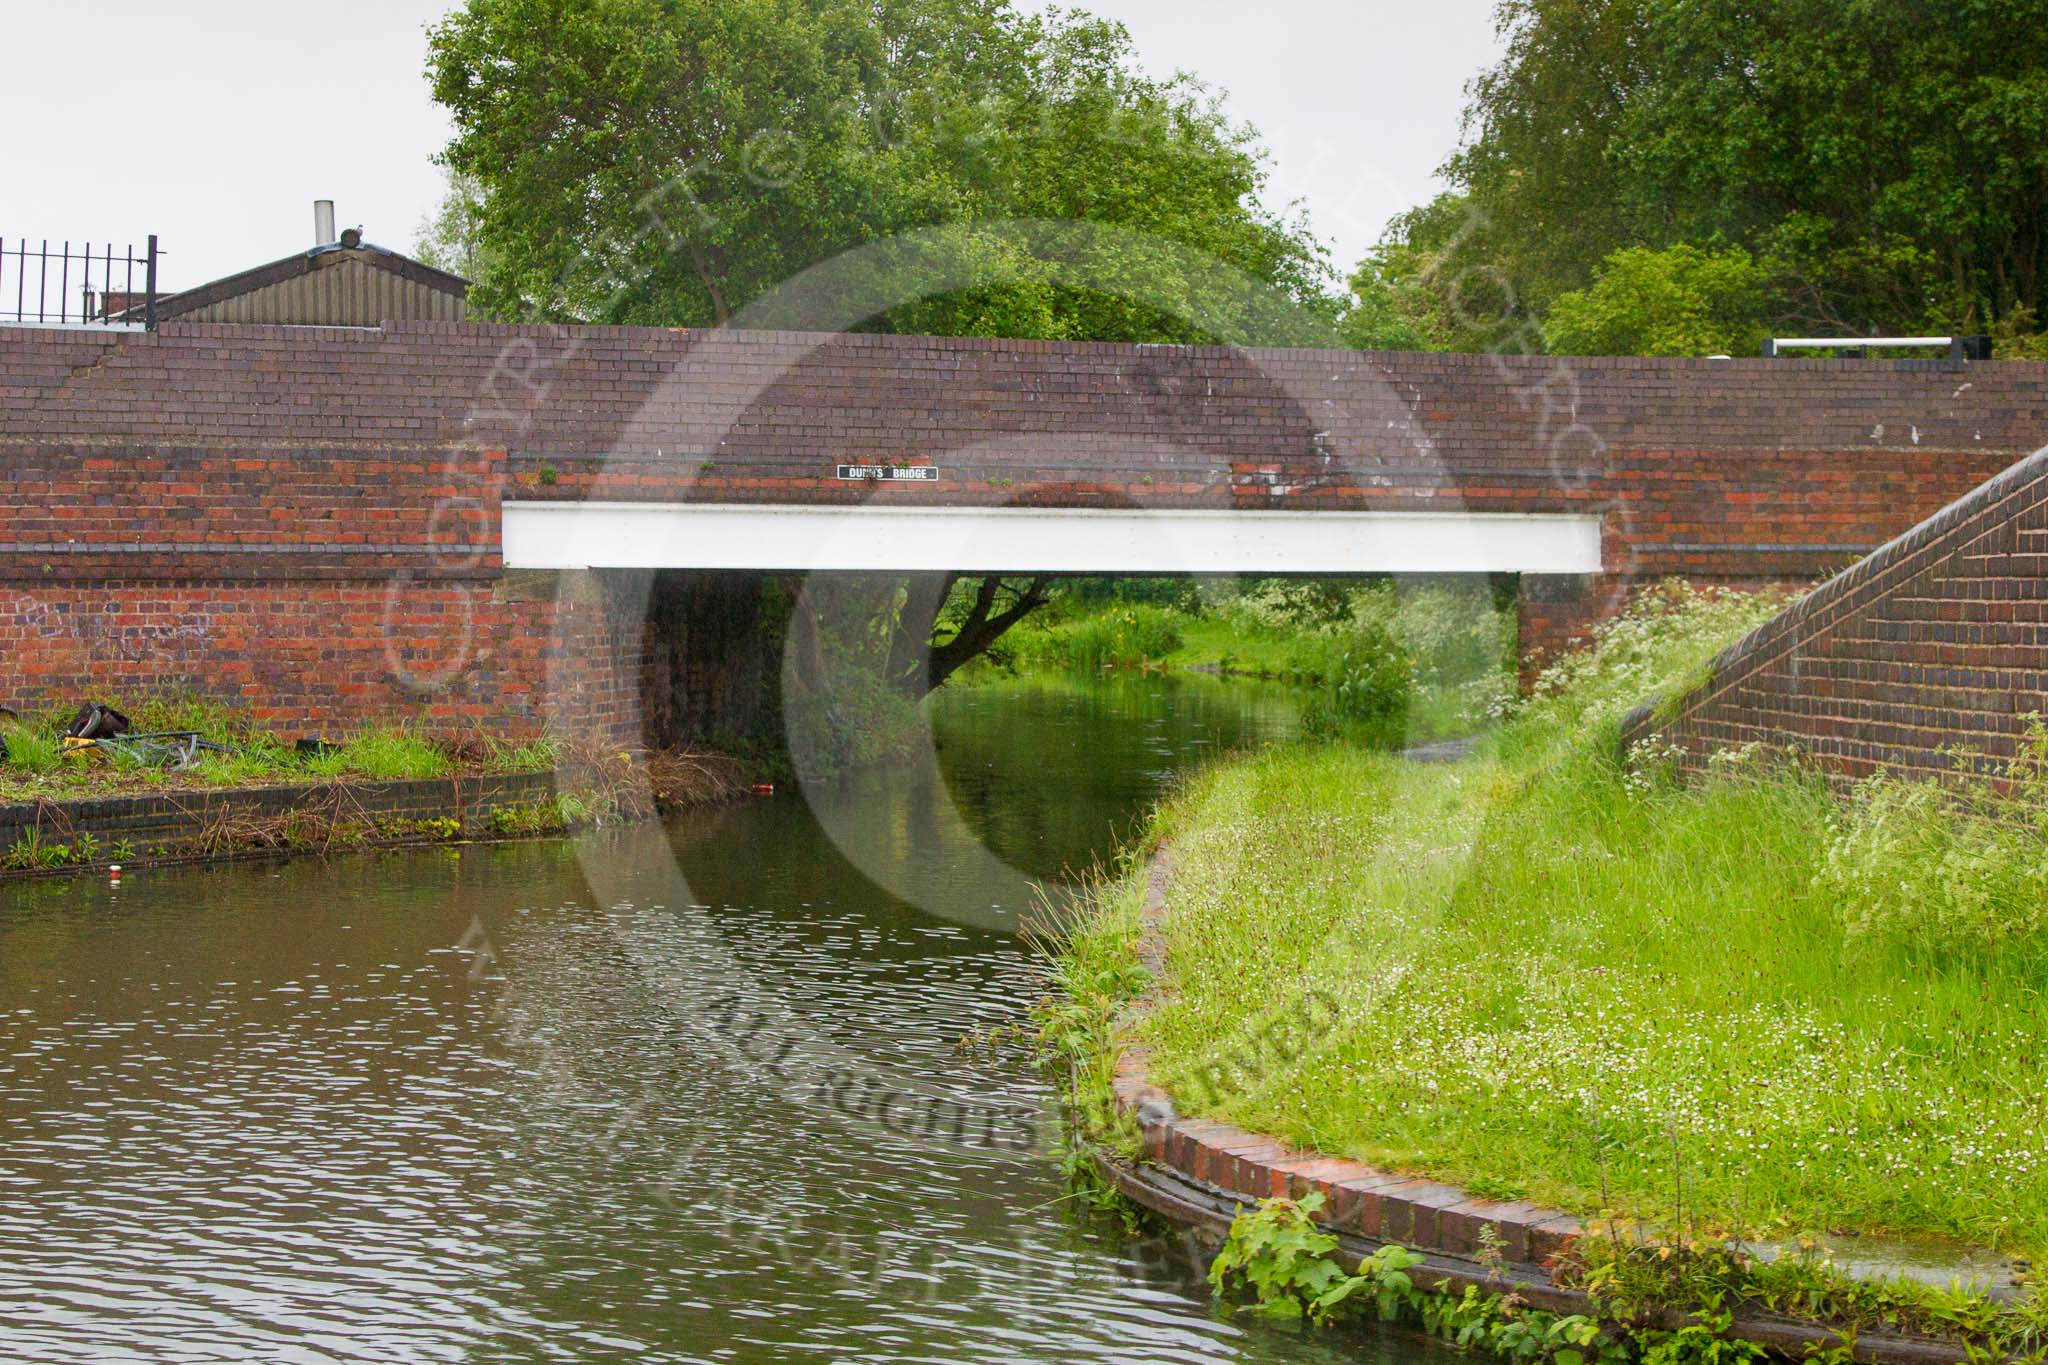 BCN Marathon Challenge 2014: Dunn's Bridge over the Bublehole Arm of the Dudley No 1 Canal..
Birmingham Canal Navigation,


United Kingdom,
on 25 May 2014 at 06:41, image #206